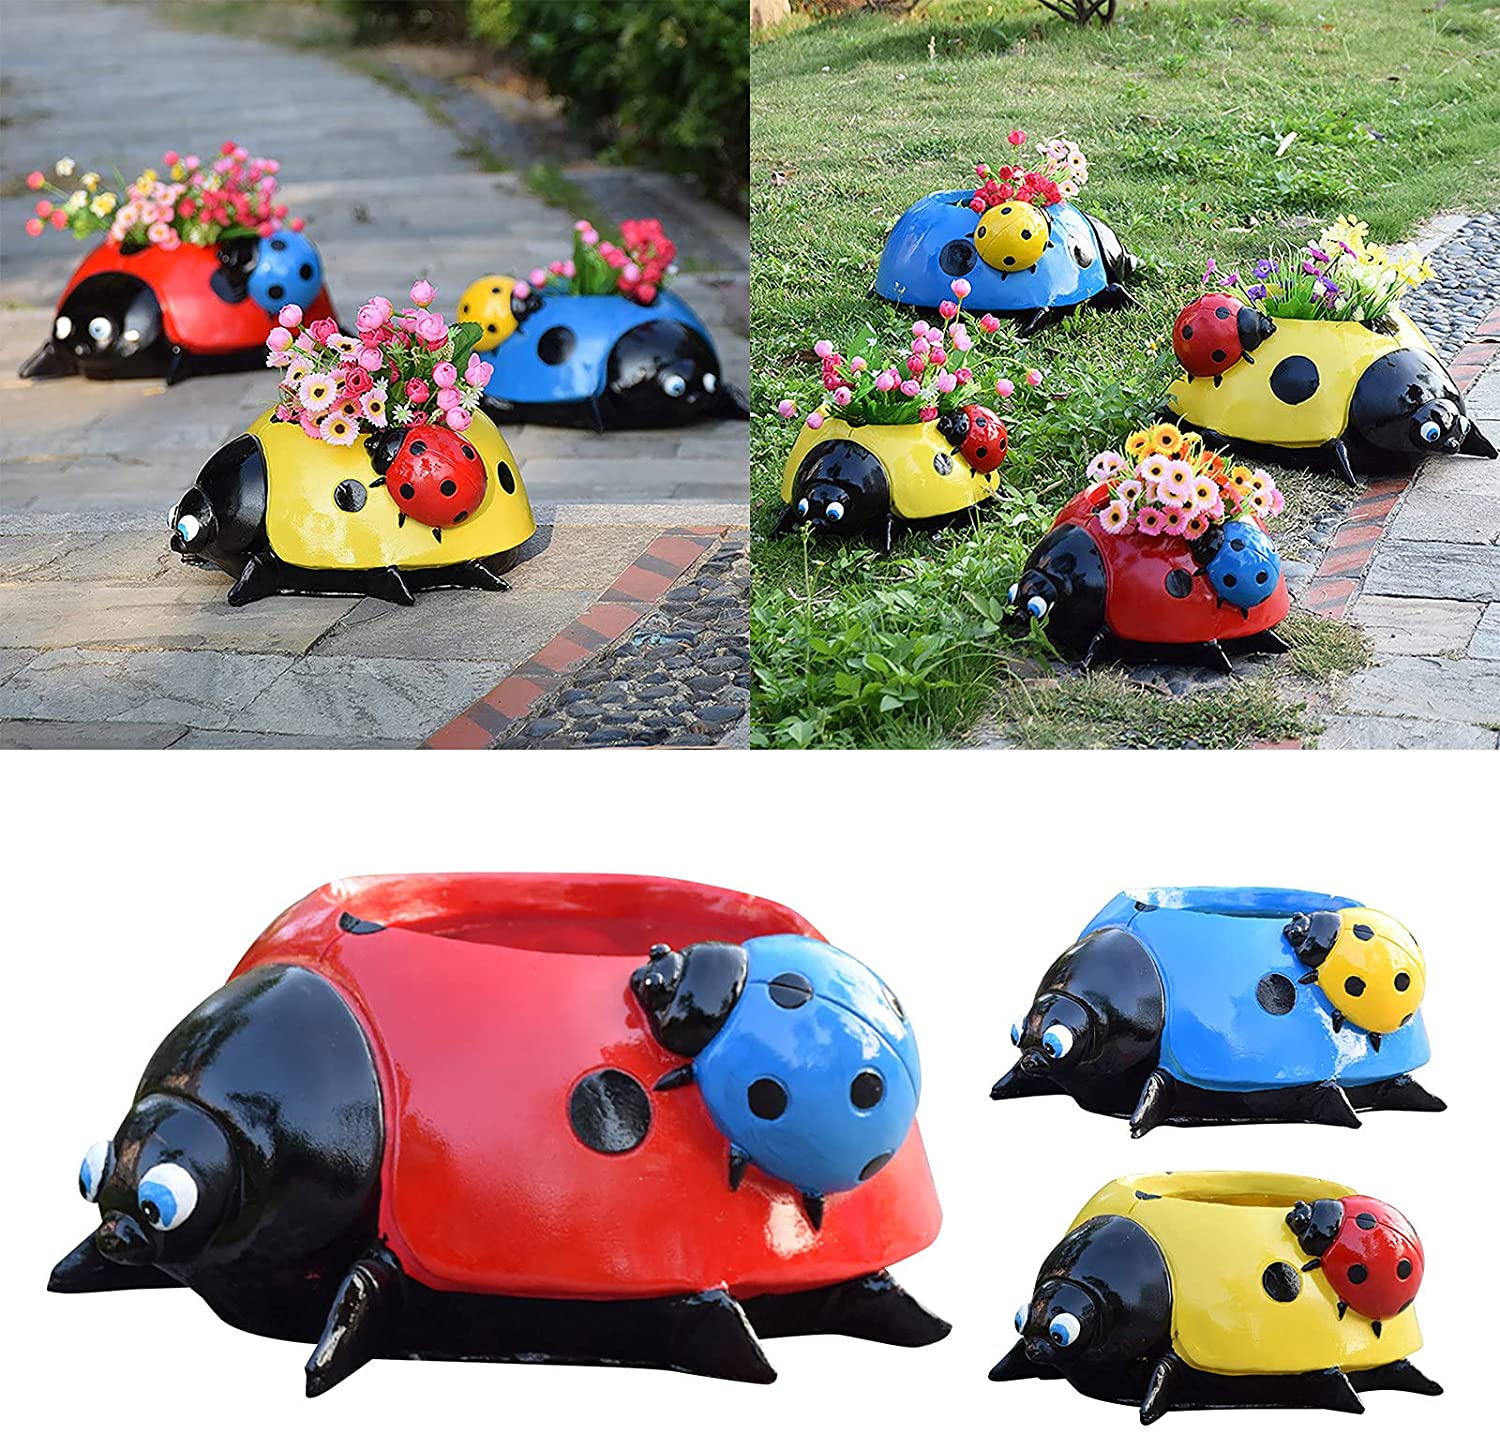 Resin Ladybugs Flower Pot Garden Decorations, Simulation Animal Ladybugs Flower Pot,Outdoor and Garden Decor Patio Yard Planter Flower Pot Indoor or Outdoor Decorations (Yellow) - image 2 of 7